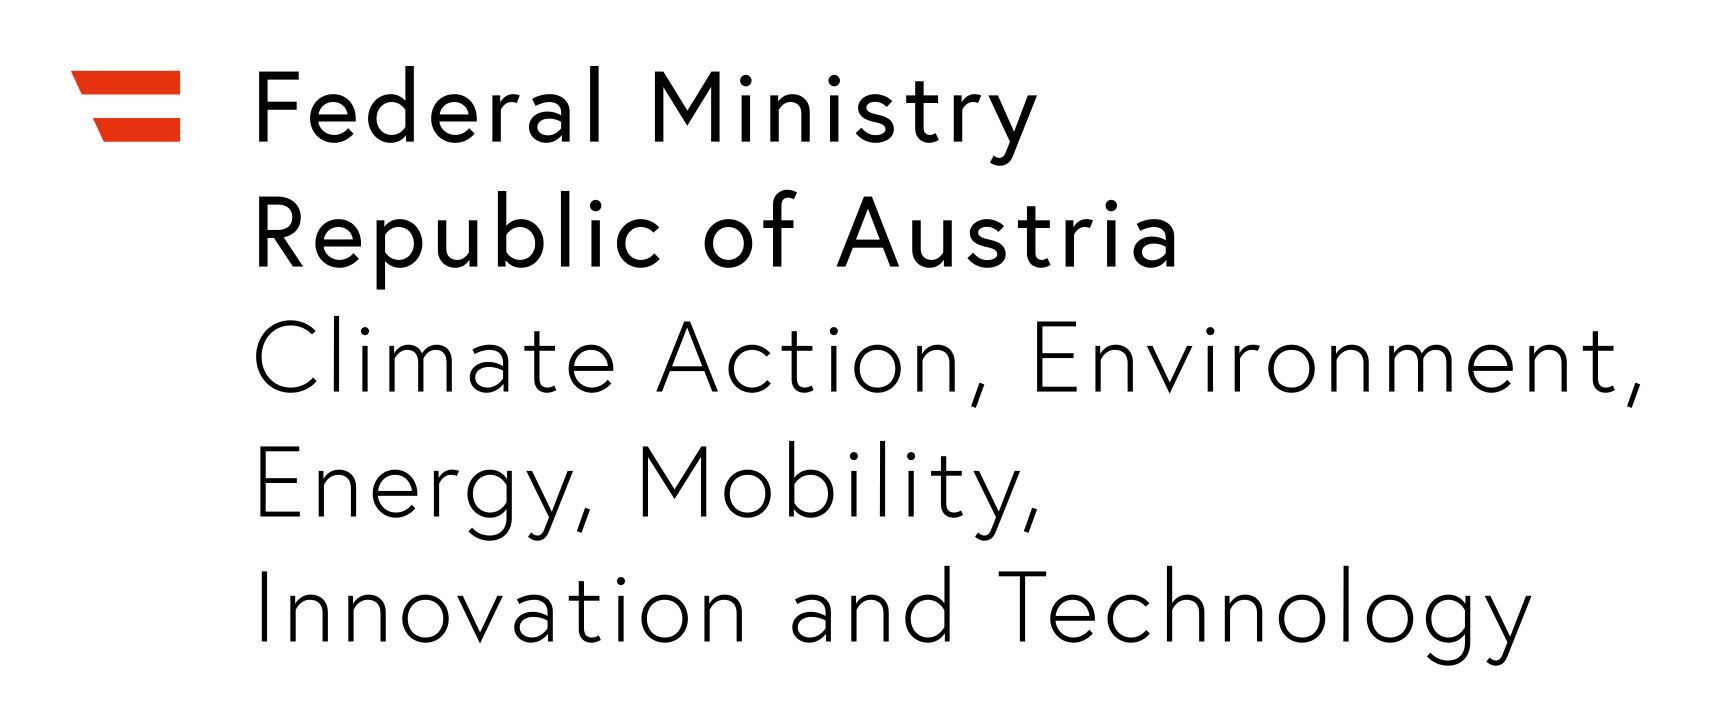 Ministry for Climate Action, Environment, Energy, Mobility, Innovation and Technology